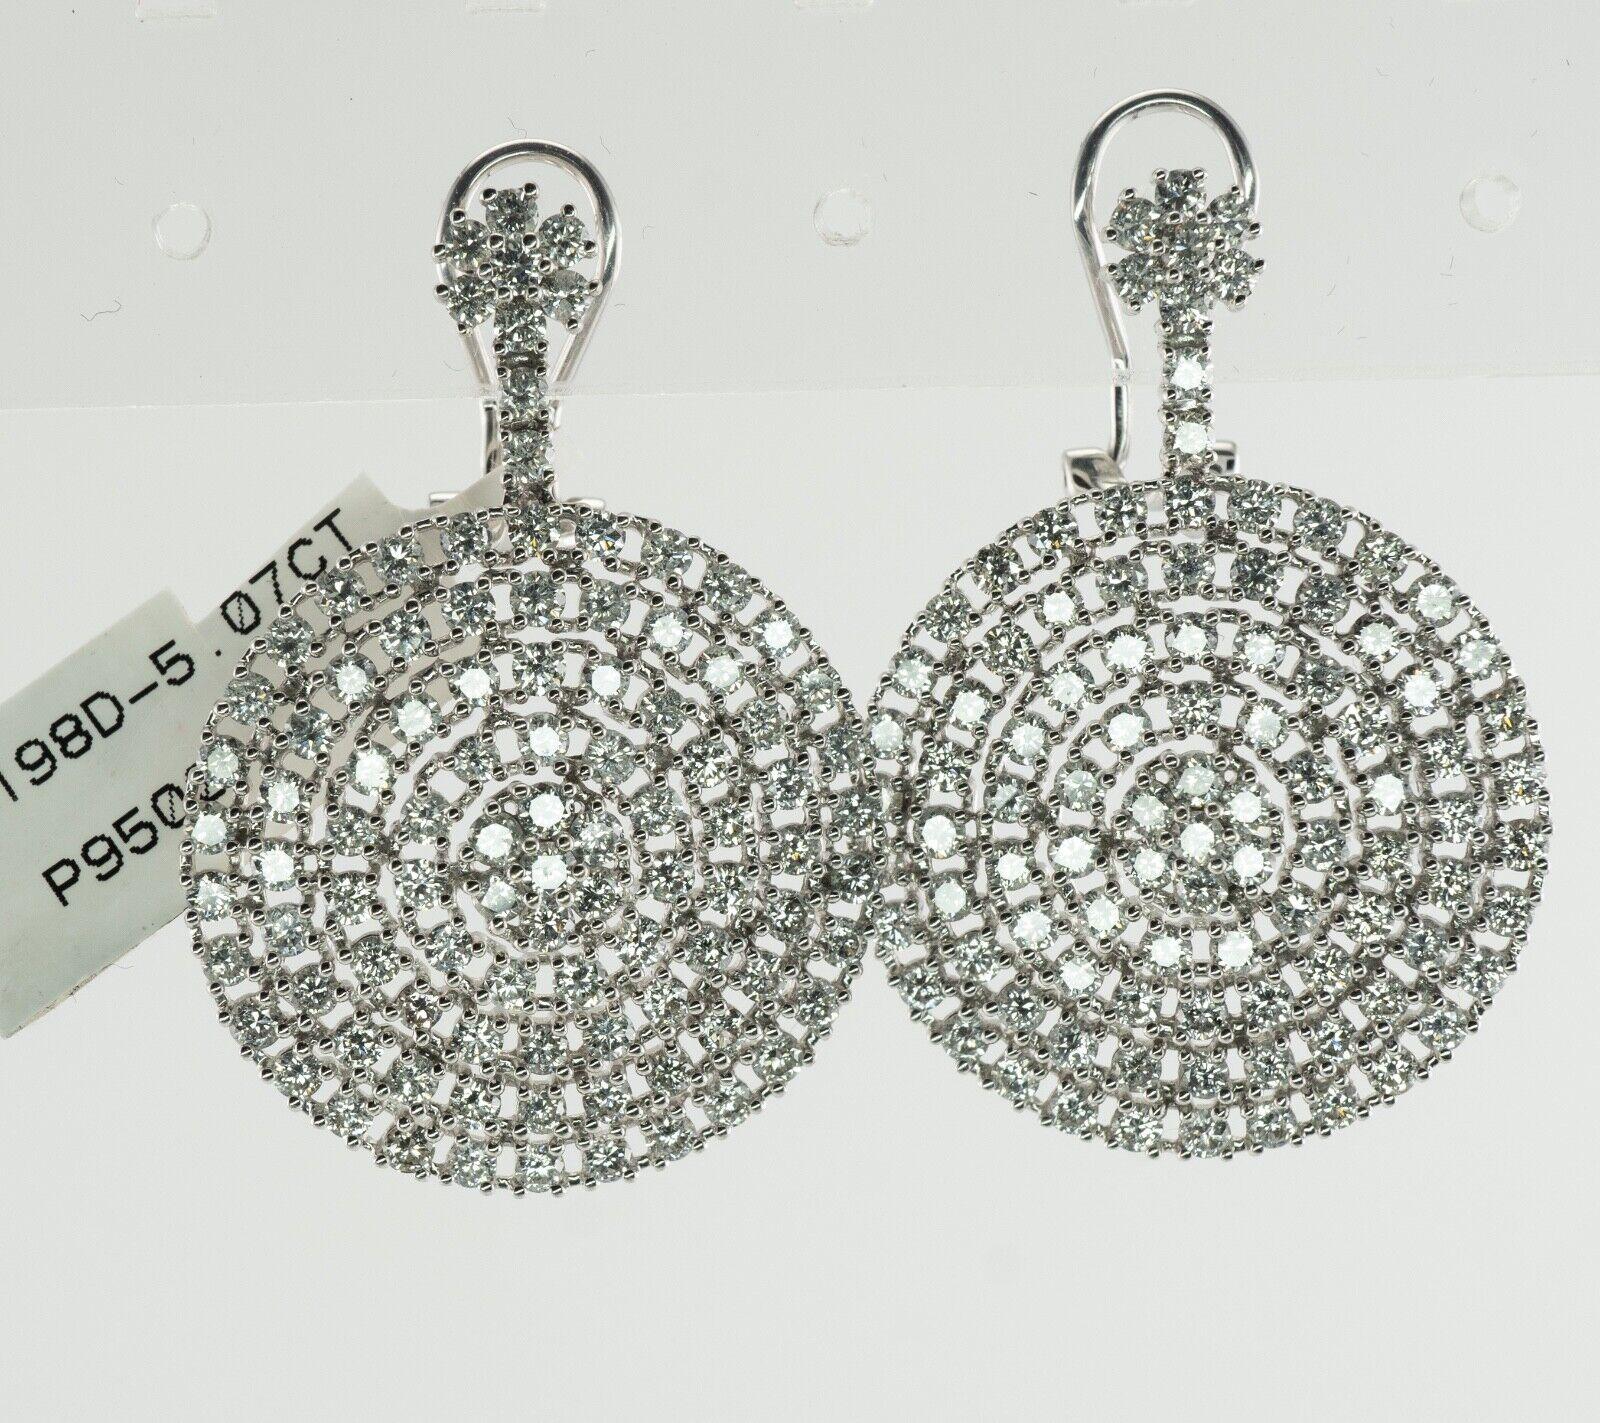 Diamond Earrings 14K White Gold Dangle Drop Geometric Round 5.07 TDW

This pair of diamond earrings is a brand new with a tag attached.
The earrings are made in solid 14K White Gold.
Each earring holds 99 round brilliant cut diamonds.
The diamonds